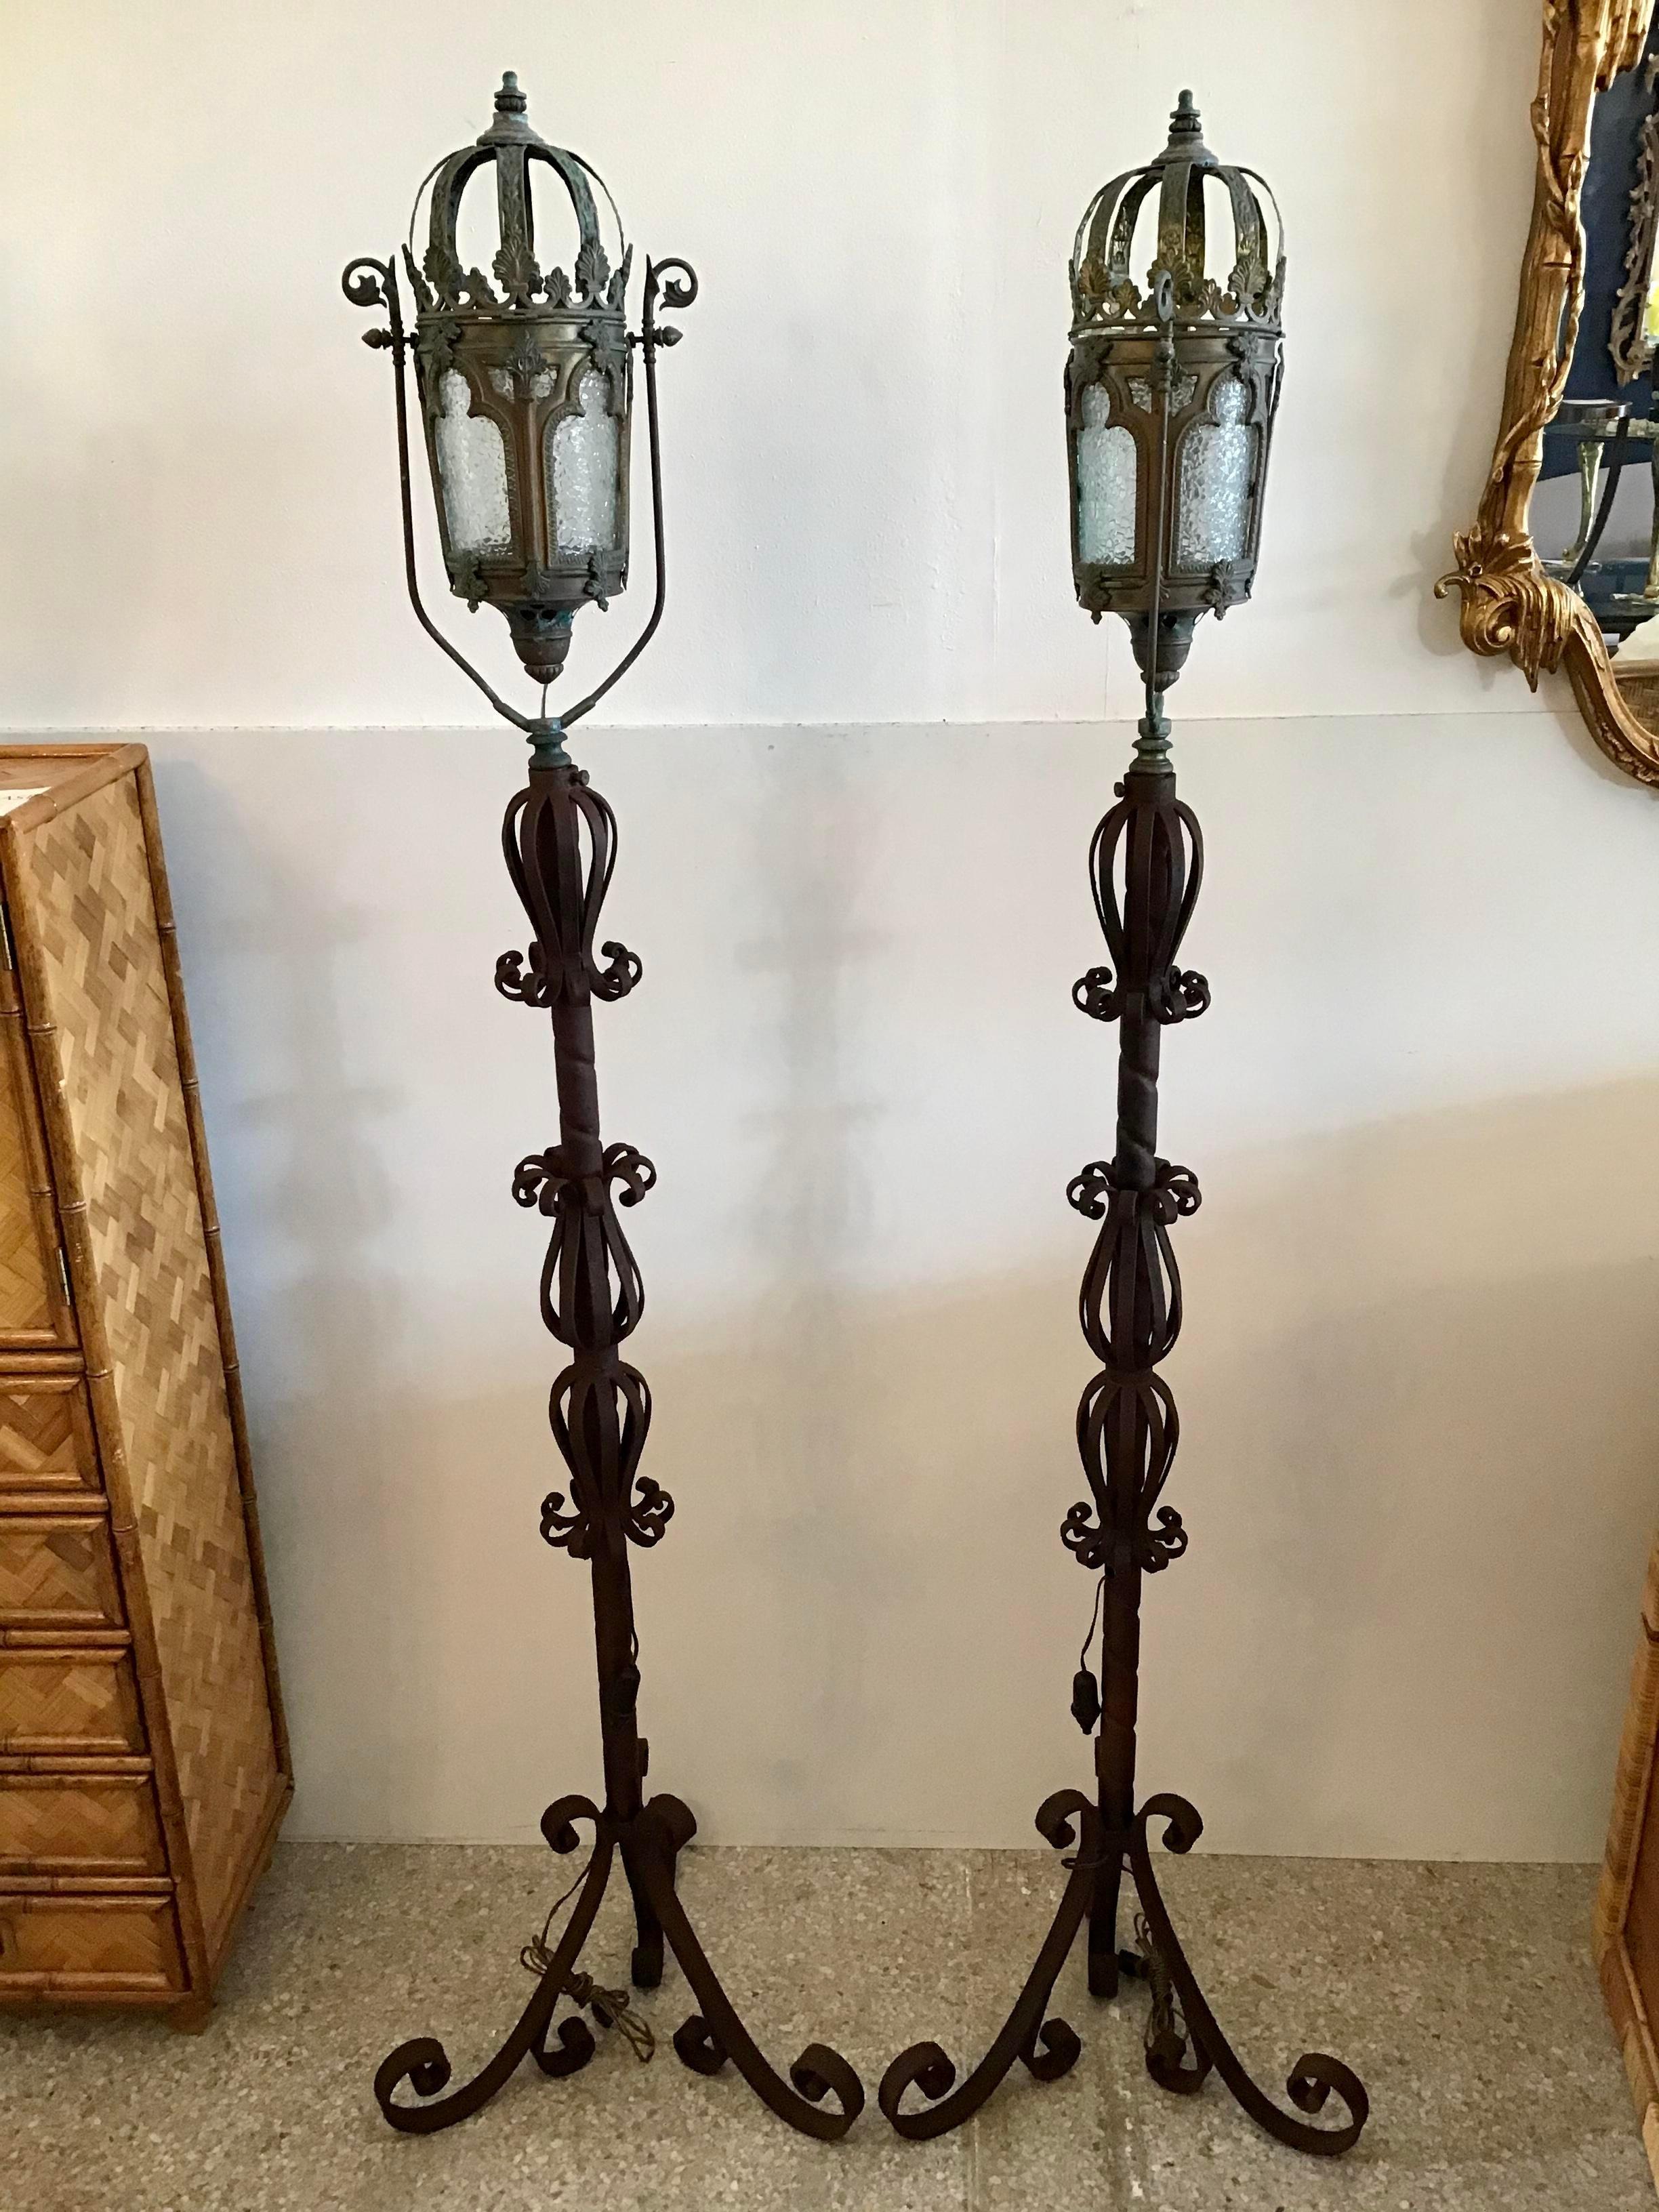 Amazing pair of Venetian iron floor lamps. Both are handmade with incredible detail.